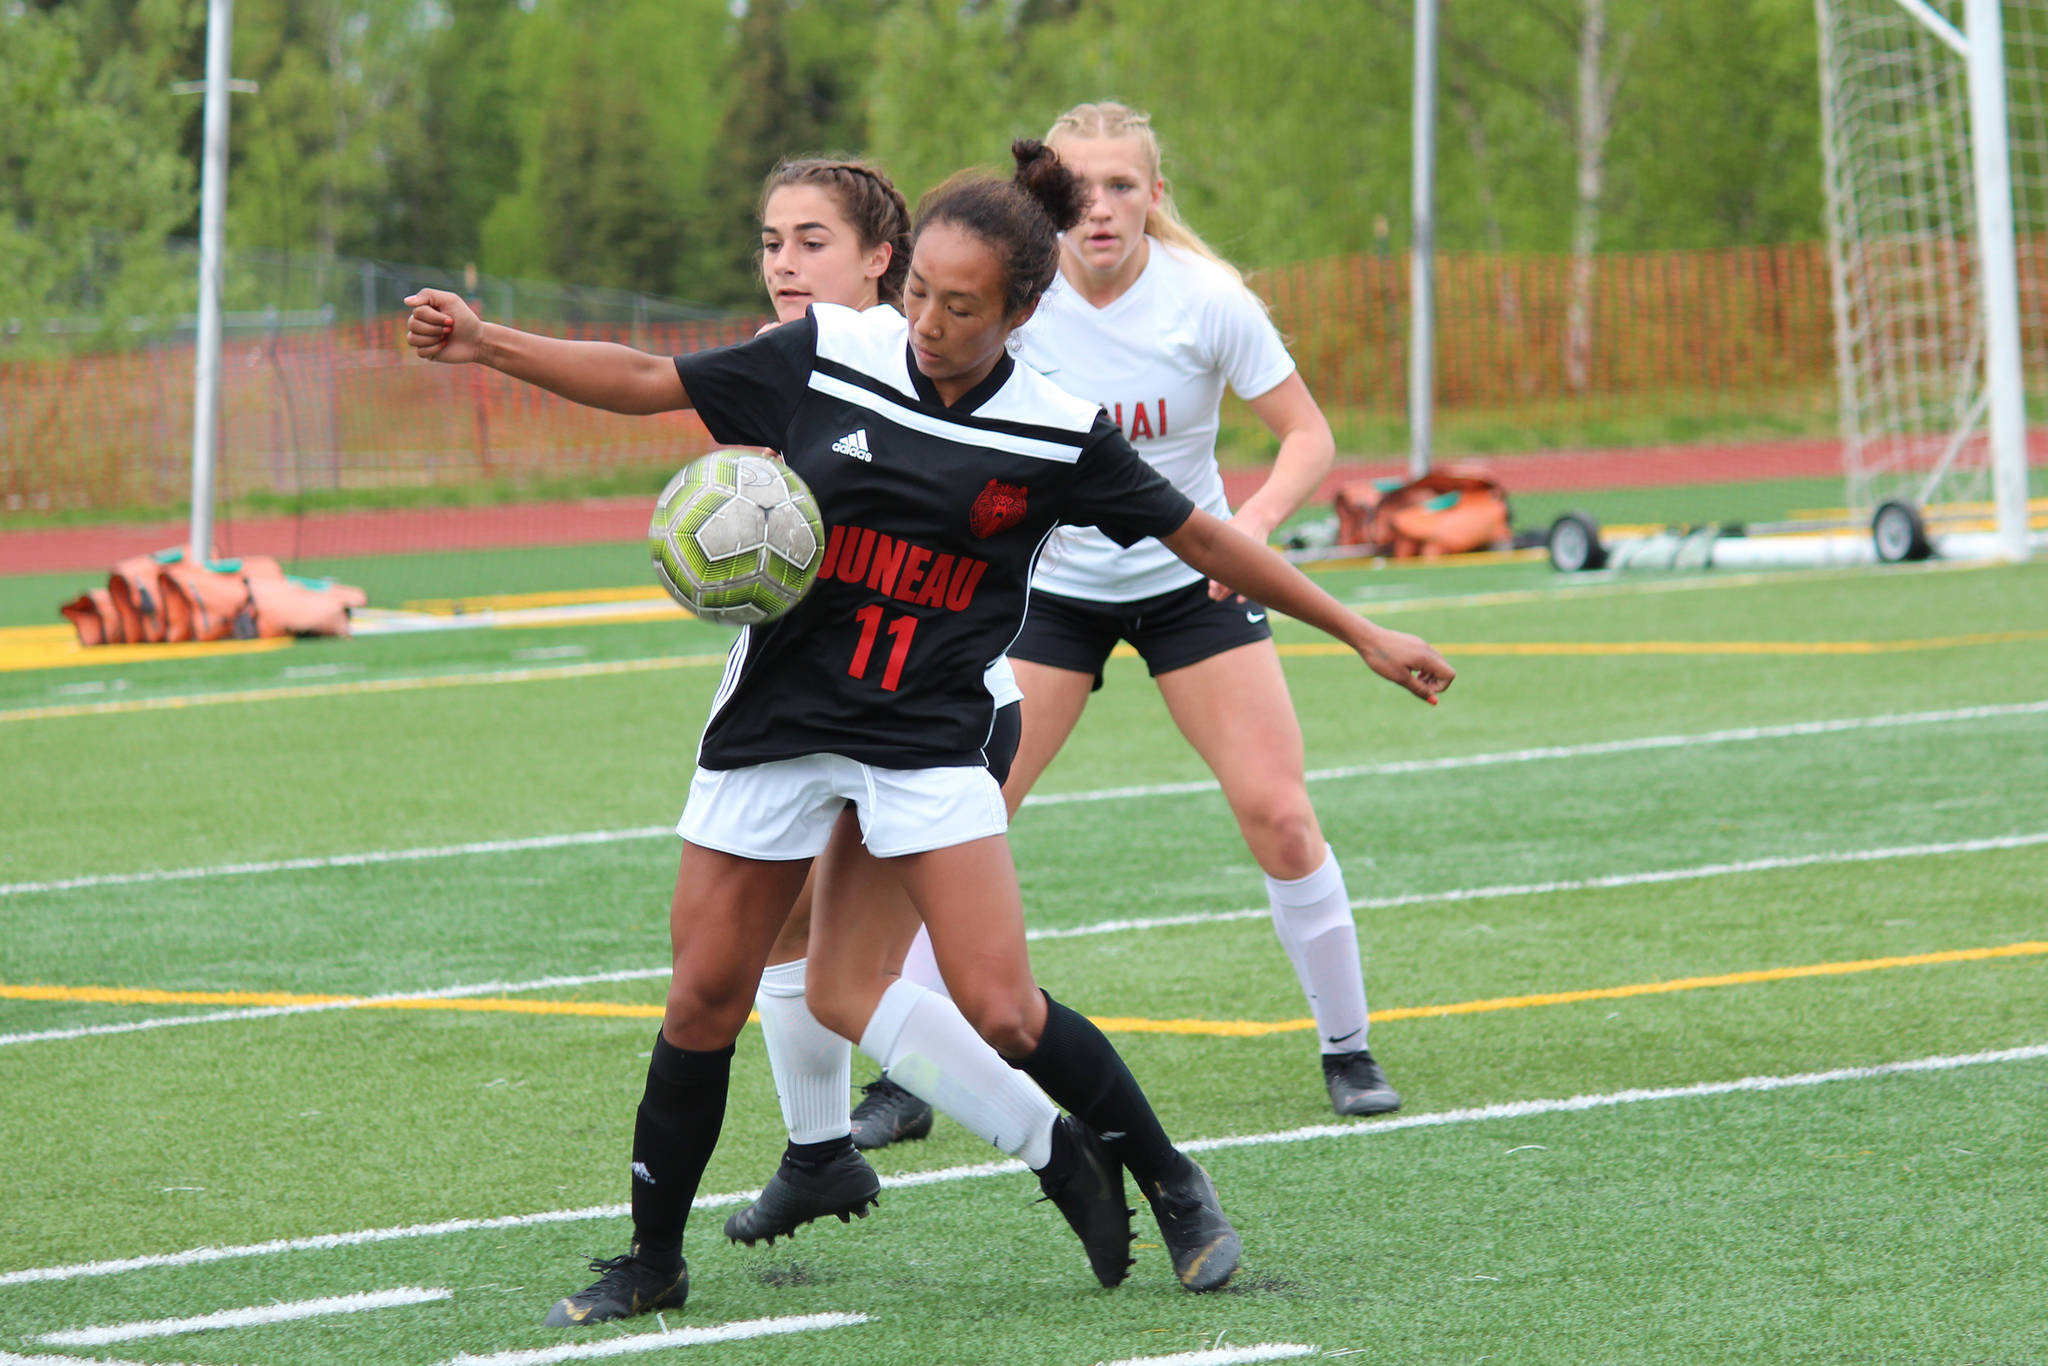 Juneau’s Malia Miller grounds the ball under pressure from Kenai Central players in a Friday, May 24, 2019 semifinal game during the Division II state soccer championships at Service High School in Anchorage, Alaska. (Photo by Megan Pacer/Homer News)